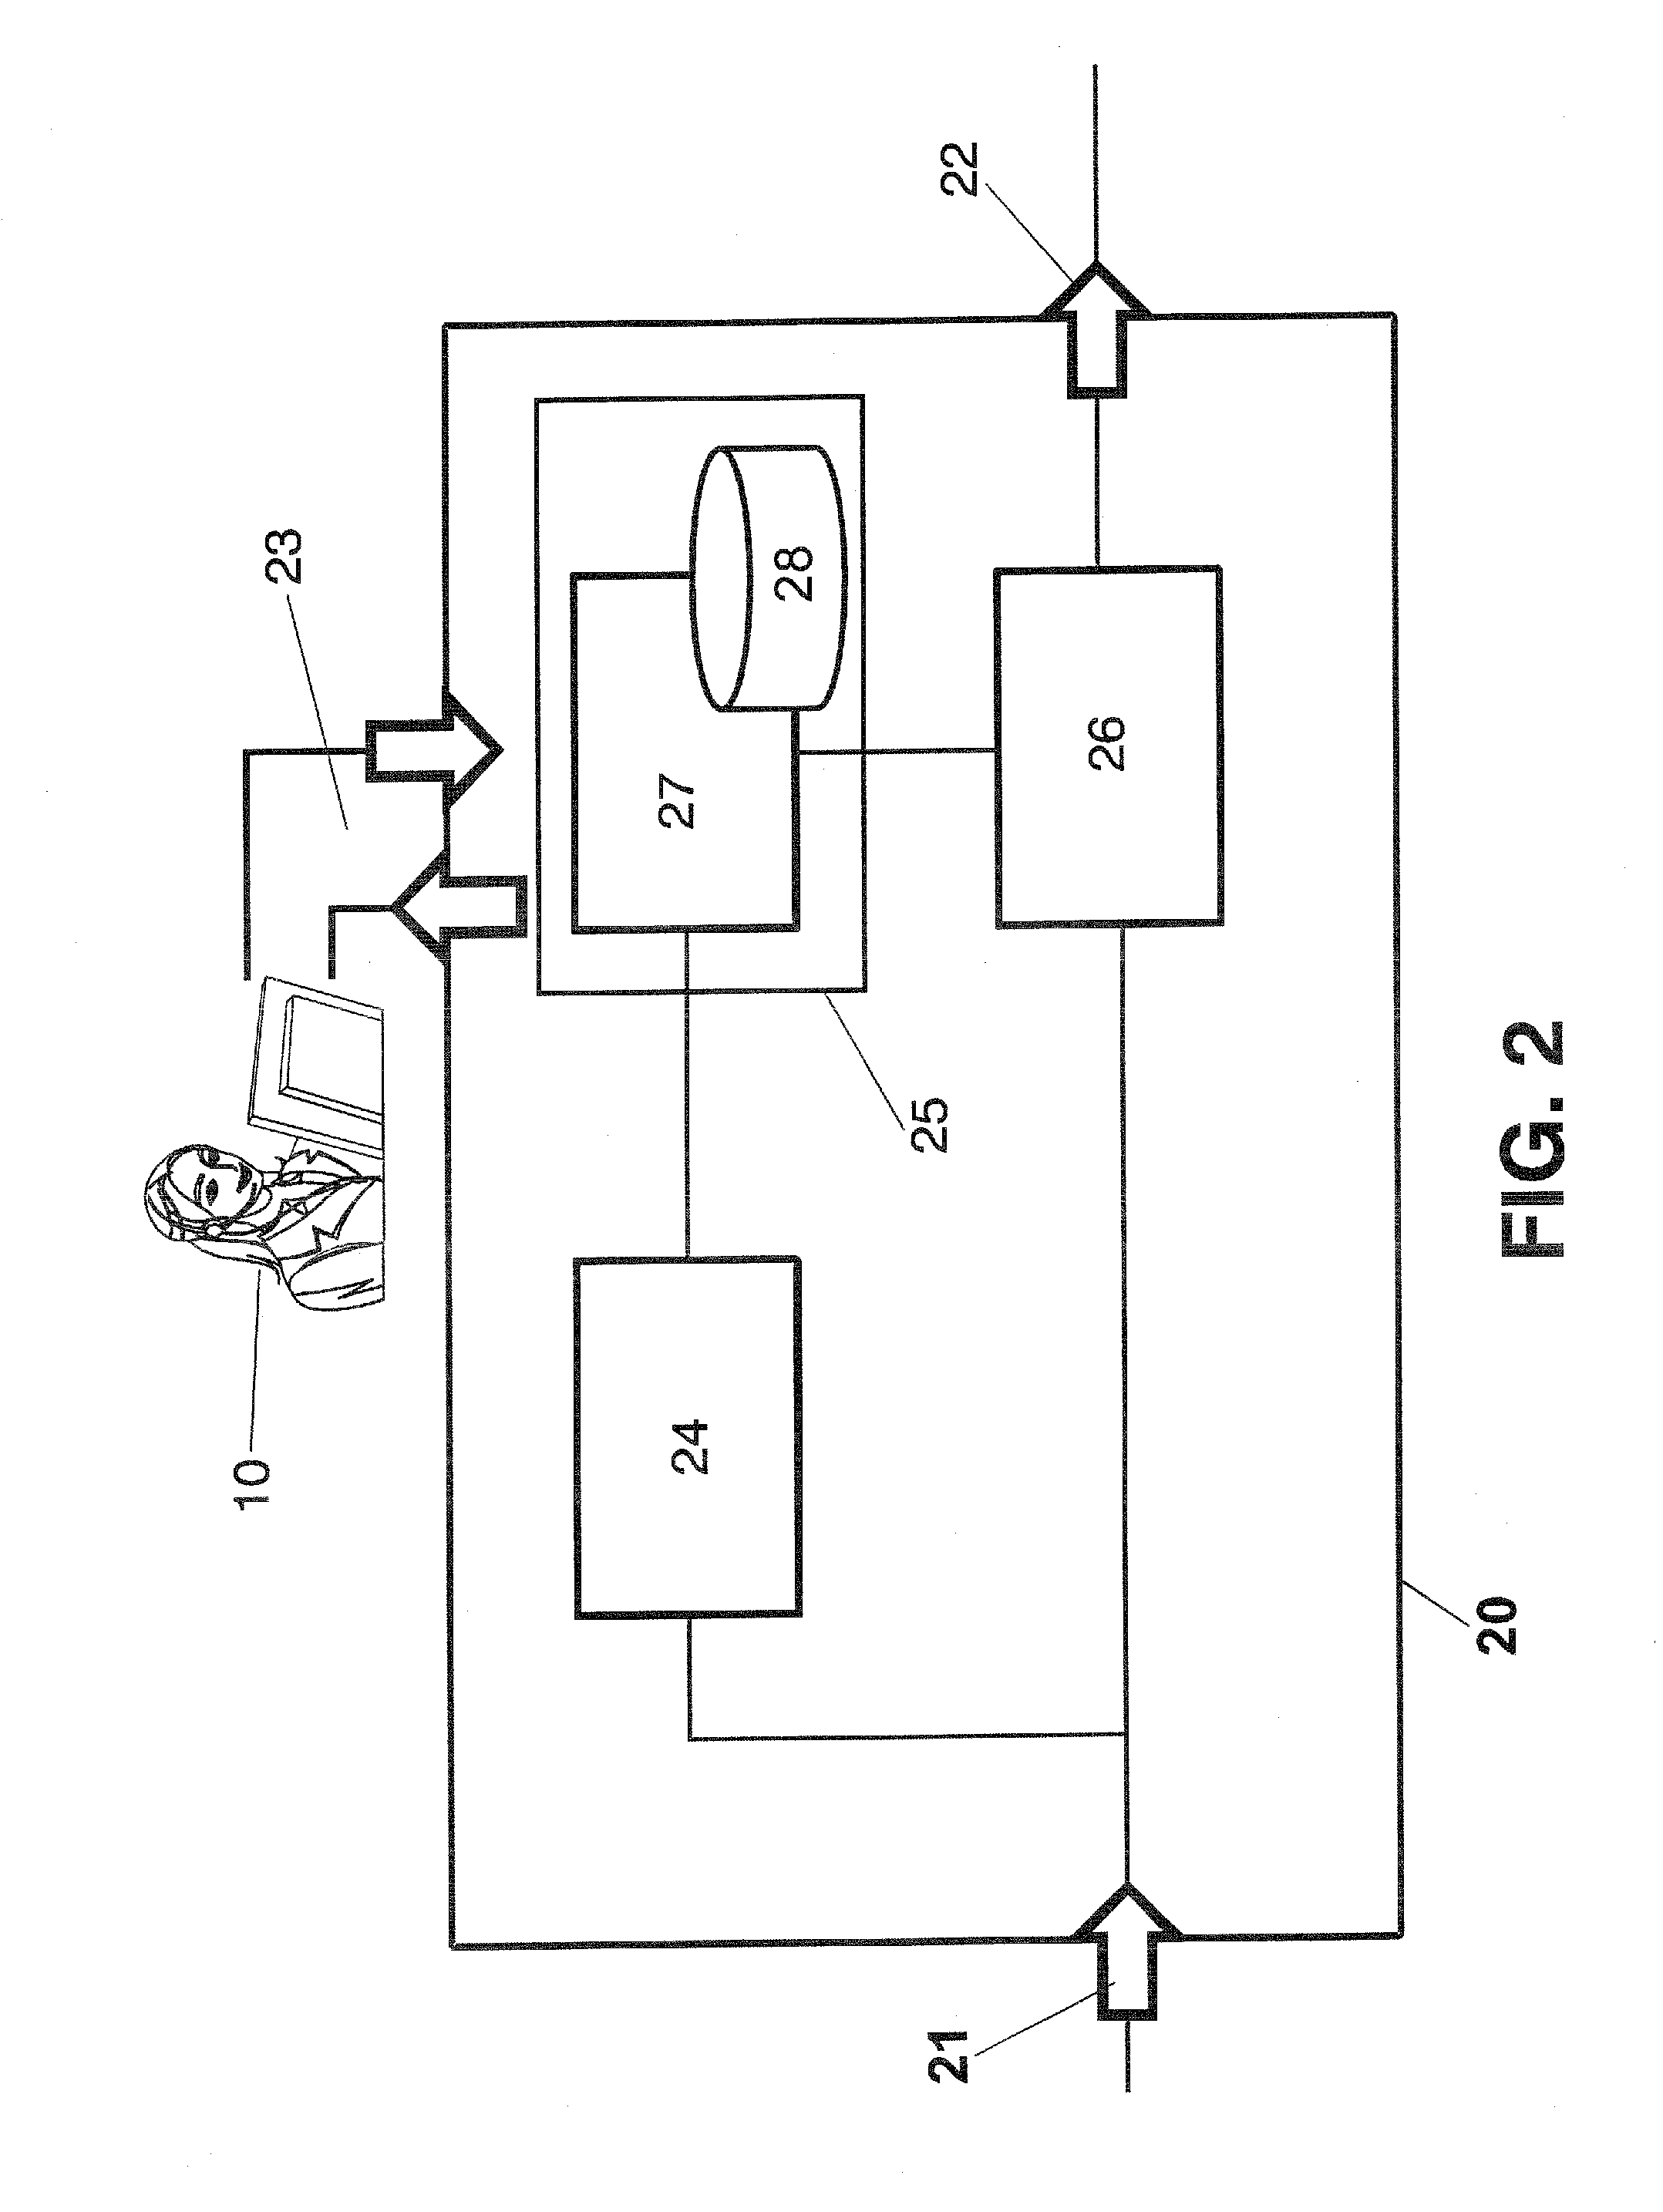 Method and device for quality measuring of streaming media services